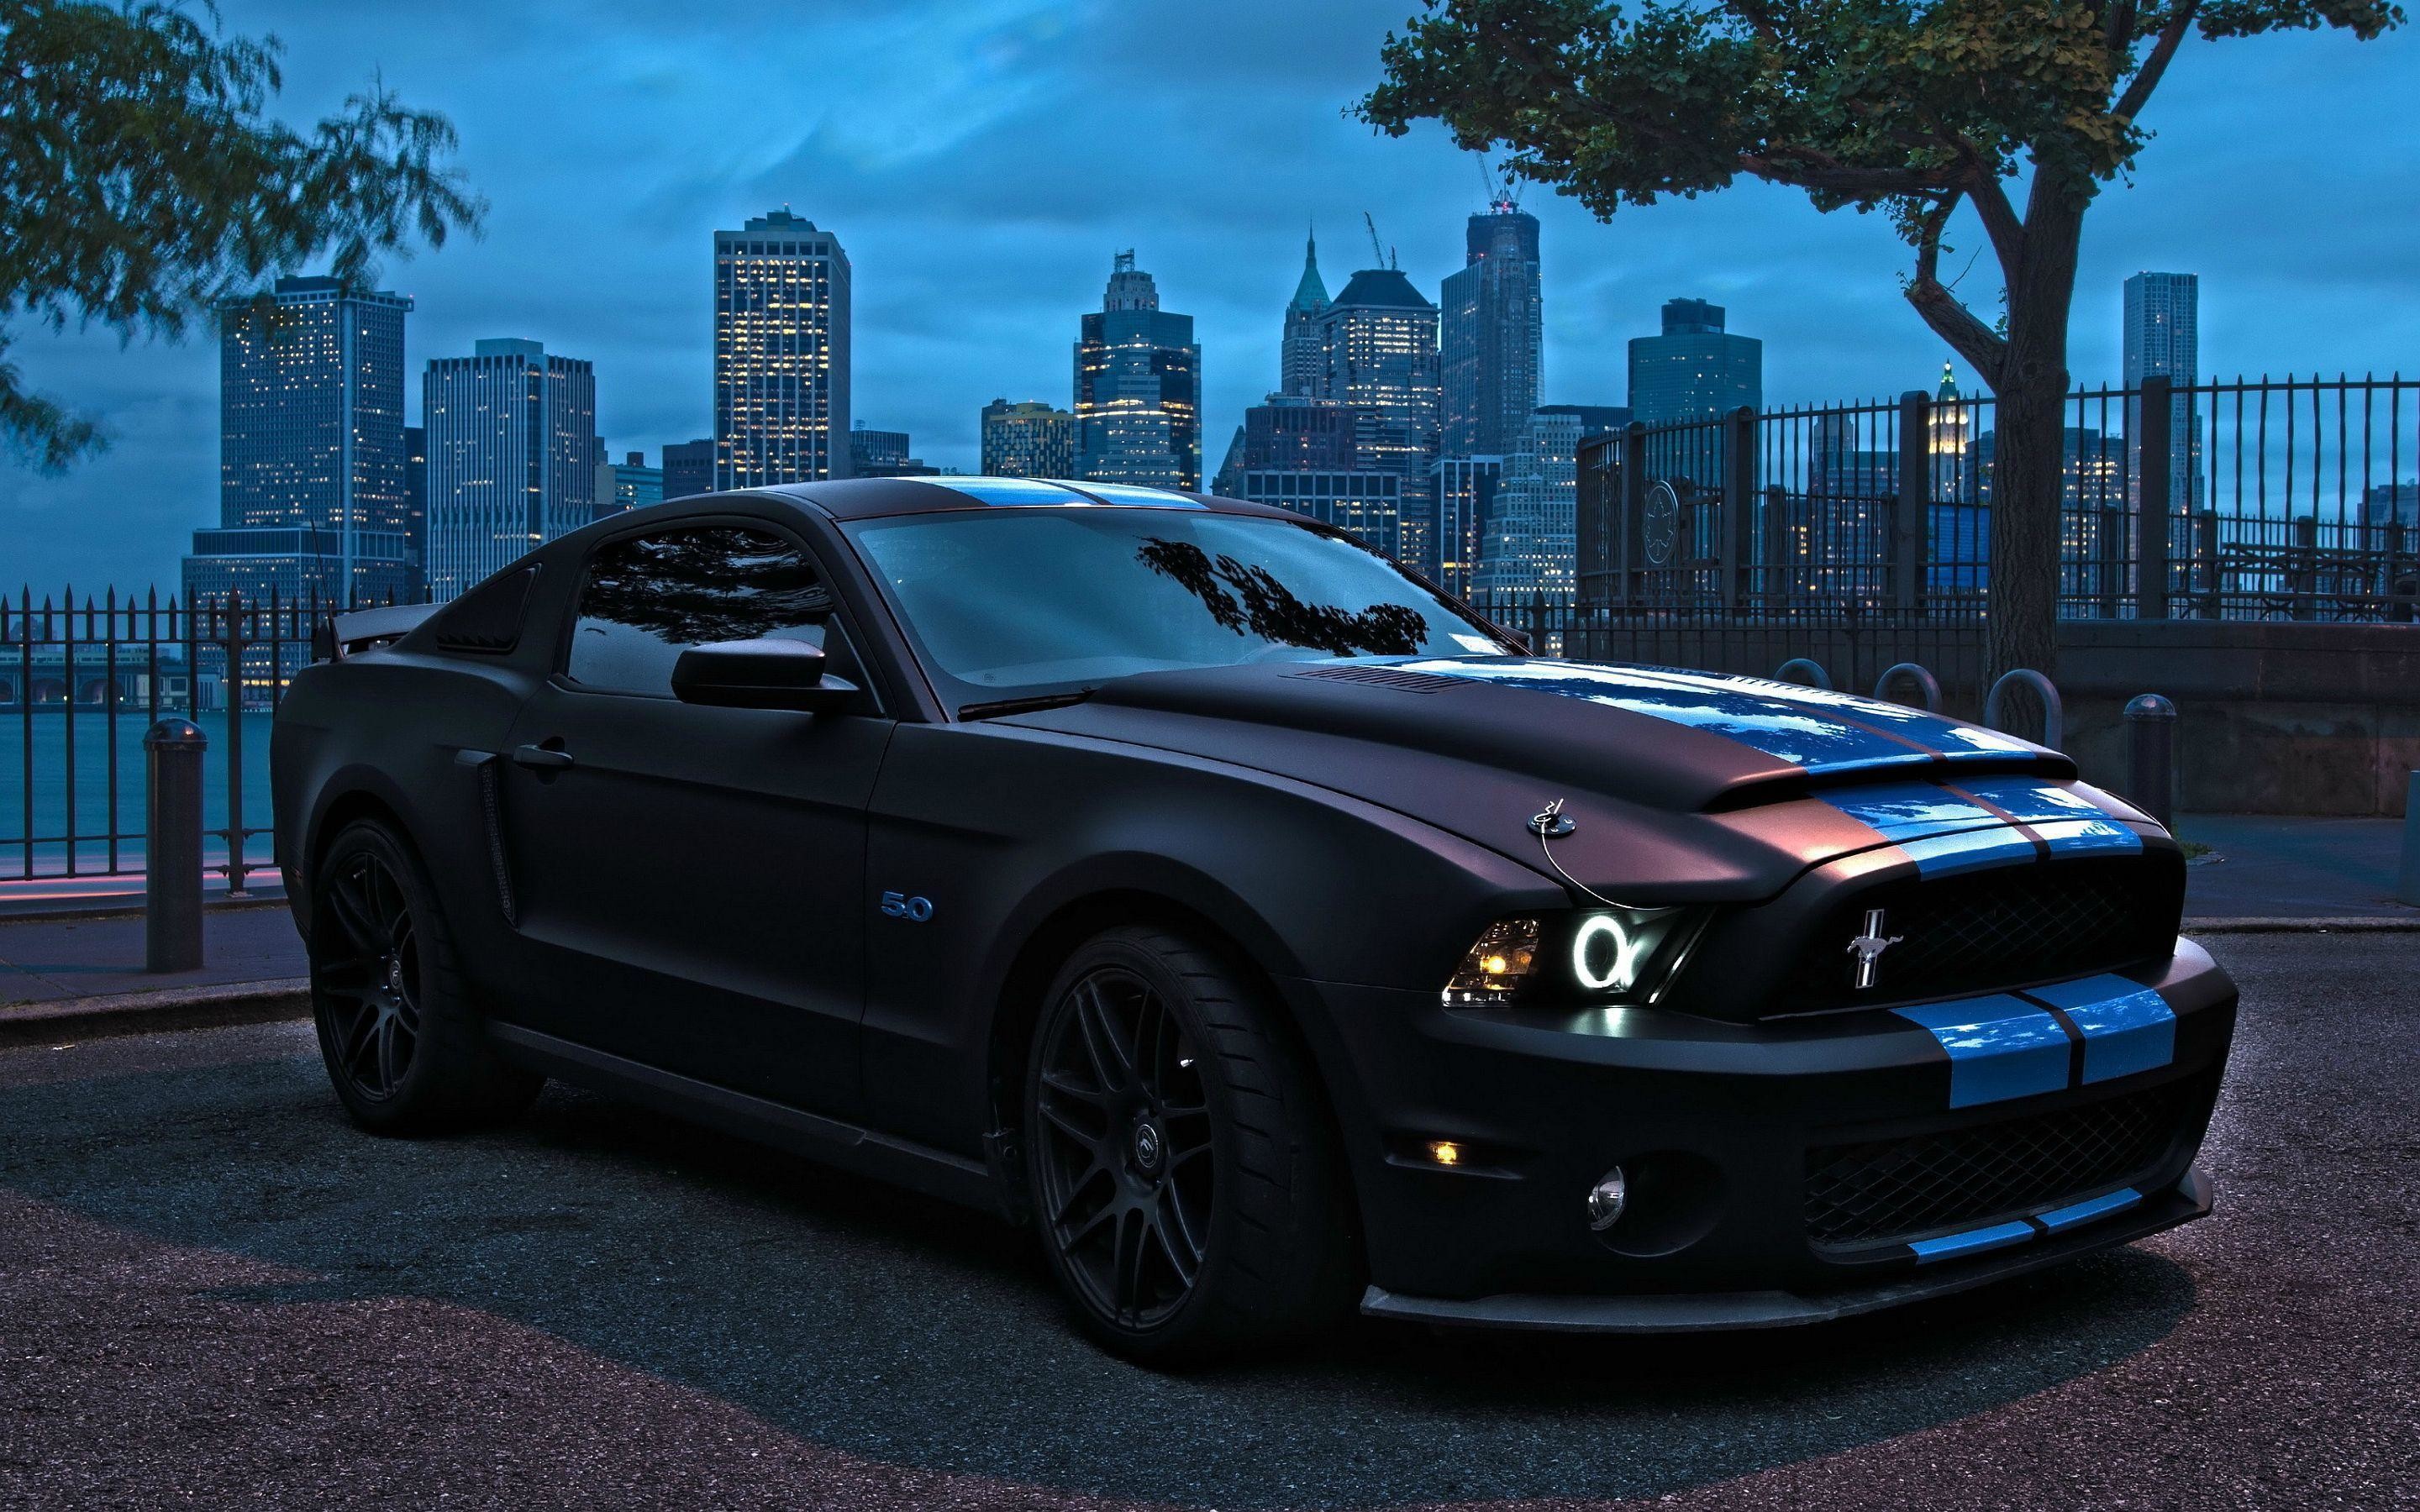 Ford Mustang Shelby Wallpaper Hd